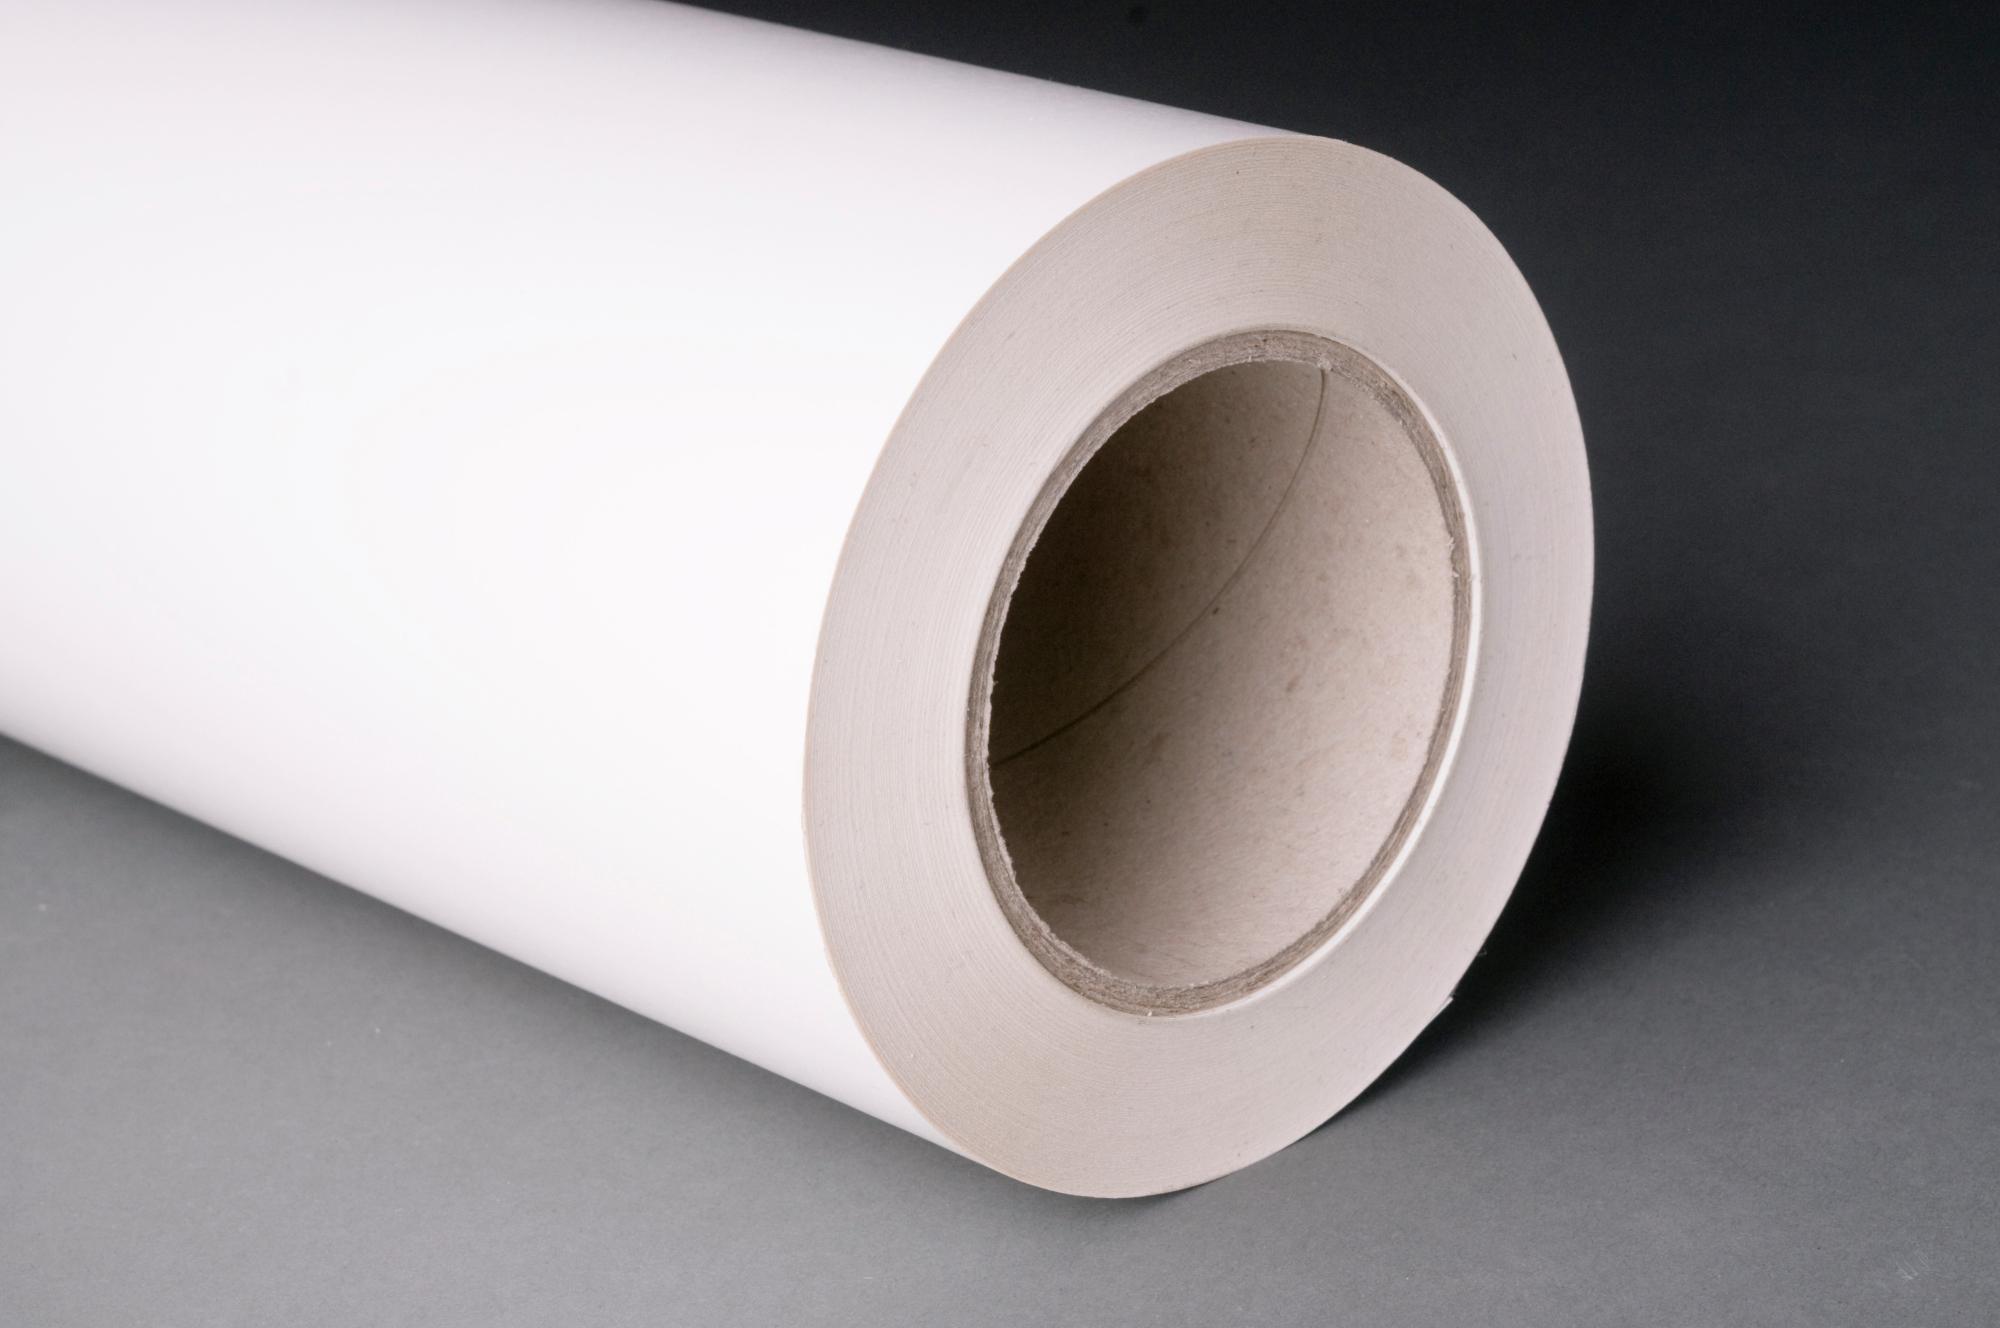 Cold Mounting Film for rough surfaces, Pressure Sensitive Film - size: 830mmx5m